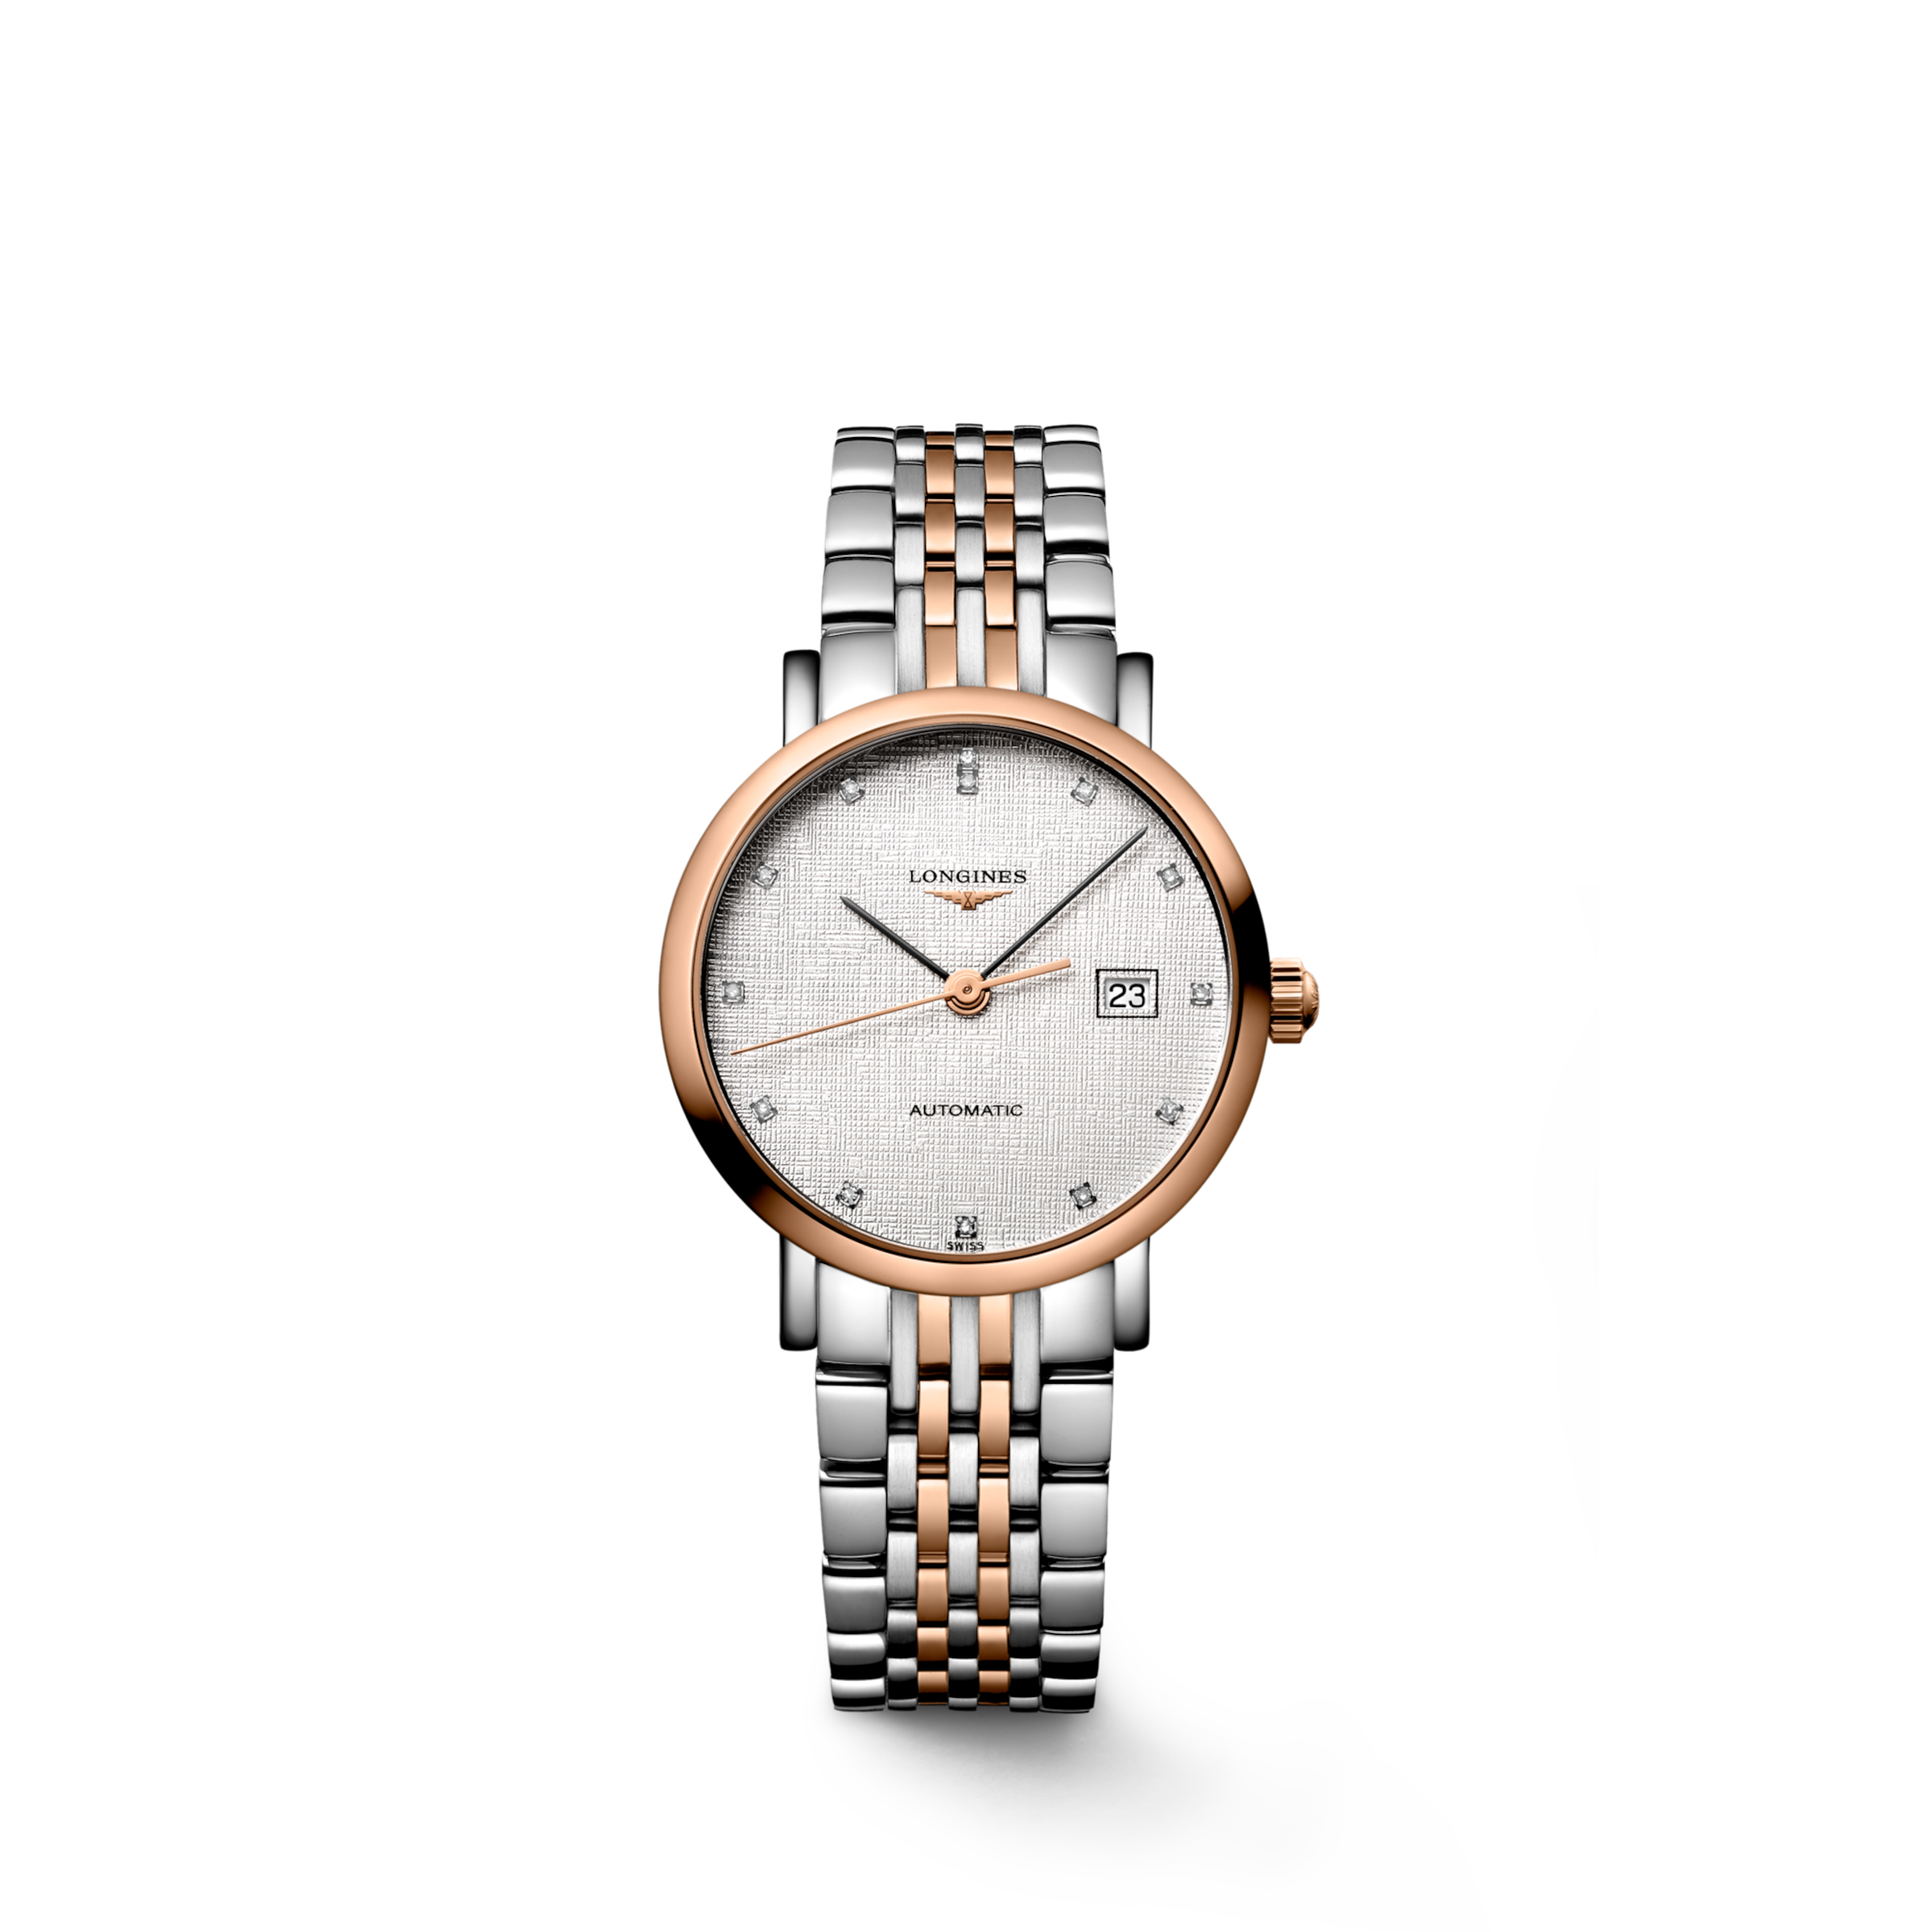 Longines ELEGANT COLLECTION Automatic Stainless steel and 18 karat pink gold cap 200 Watch - L4.310.5.77.7